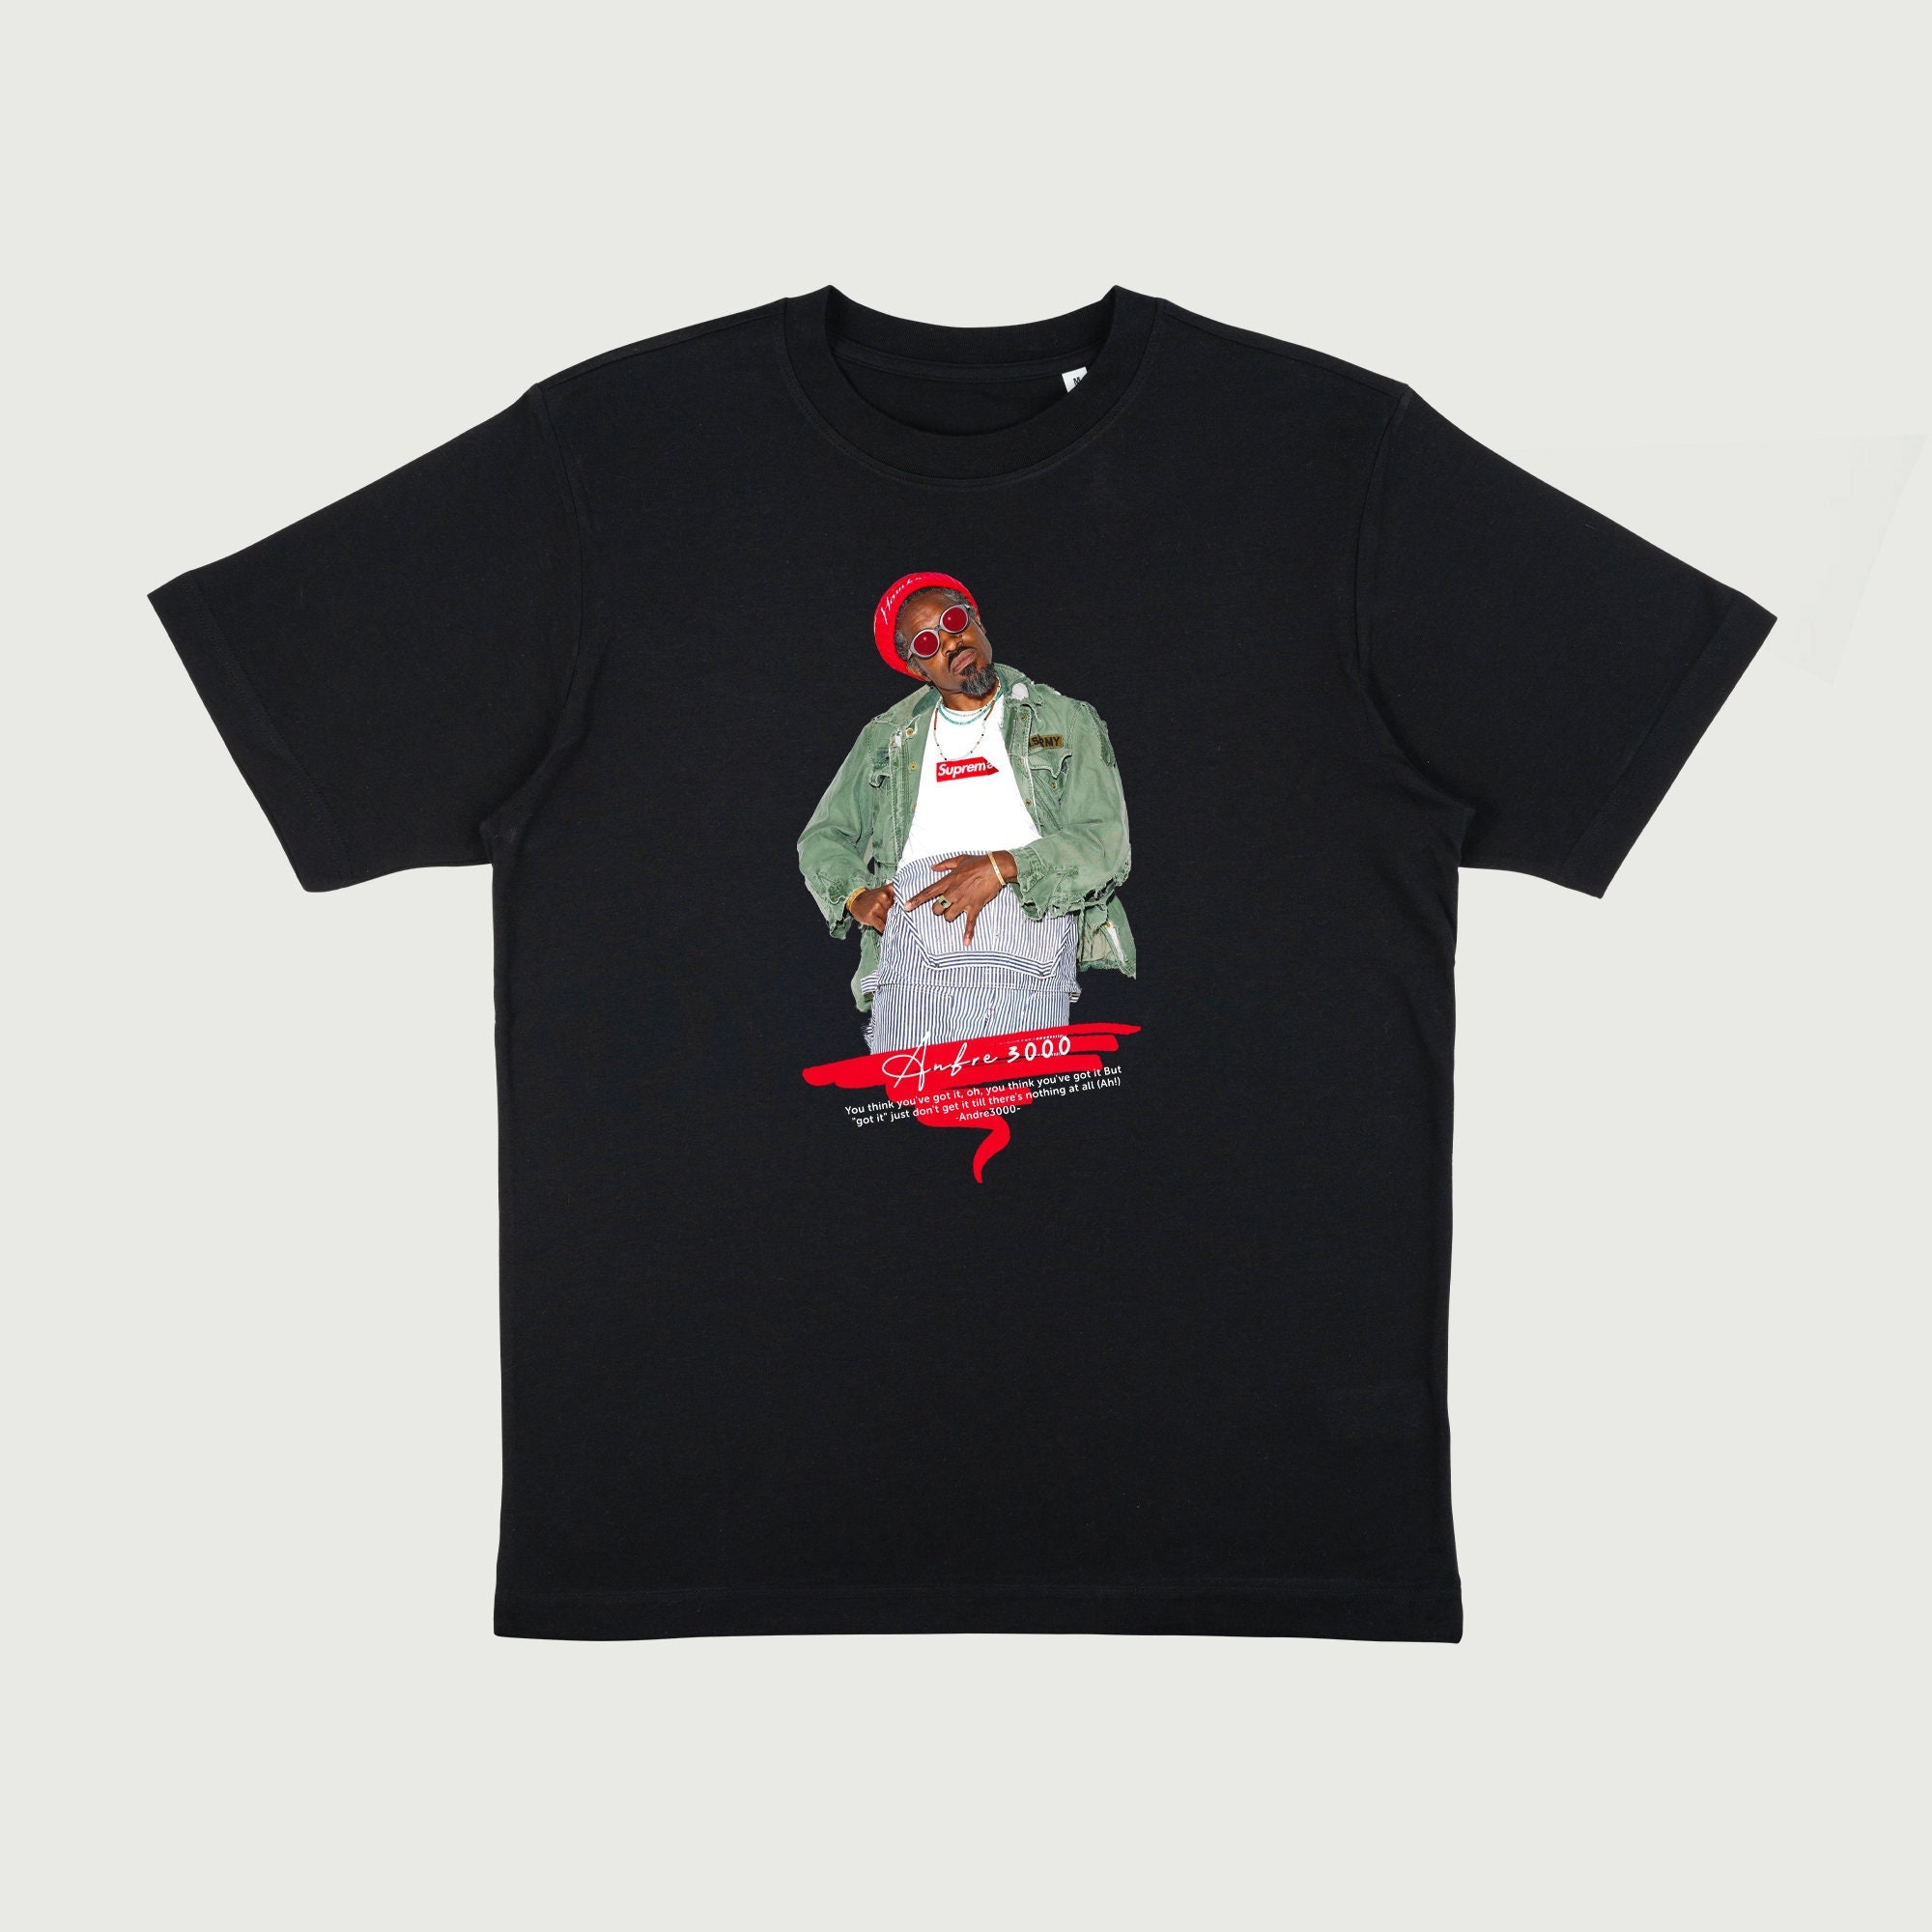 Discover Outkast Shirt, Andre 3000 Shirt